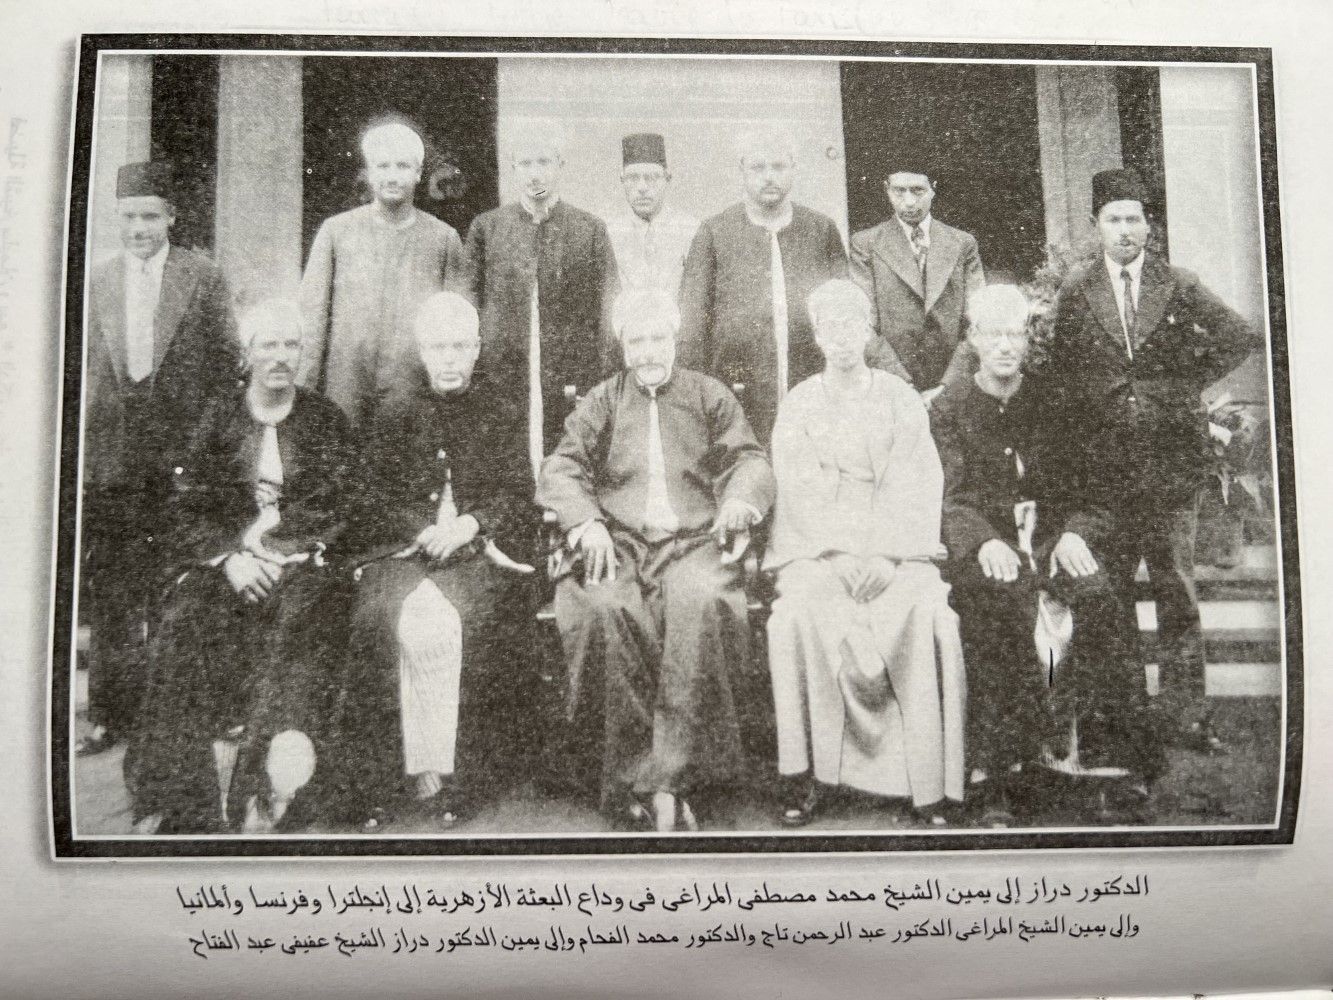 MA Draz and the other delegates sent to France, England and Germany in 1936